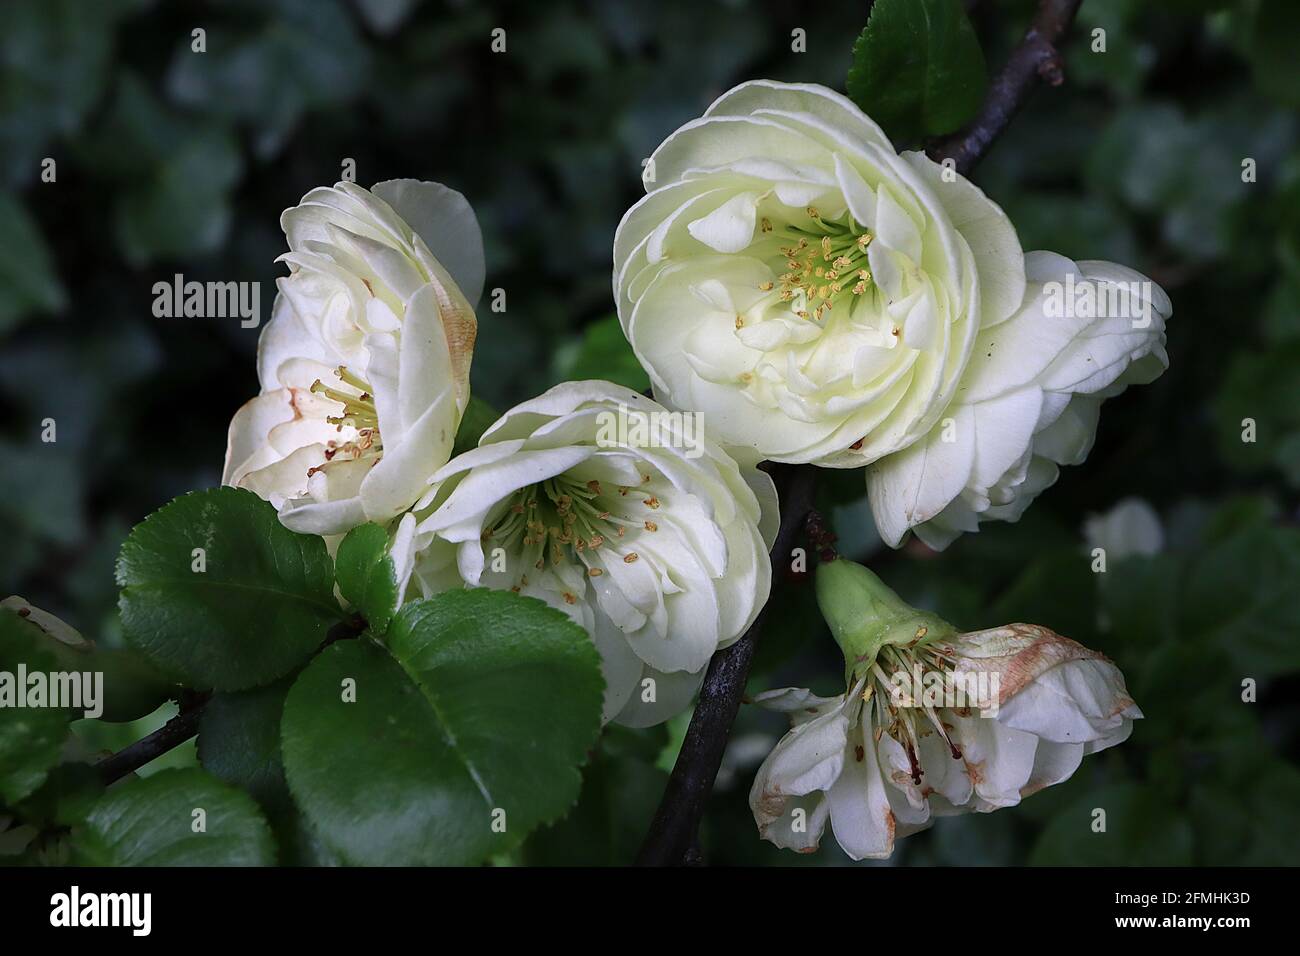 Chaenomeles speciosa ‘Kinshiden’ Japanese flowering quince Kinshiden – very pale green white yellow double flowers in small clusters,  May, England,UK Stock Photo